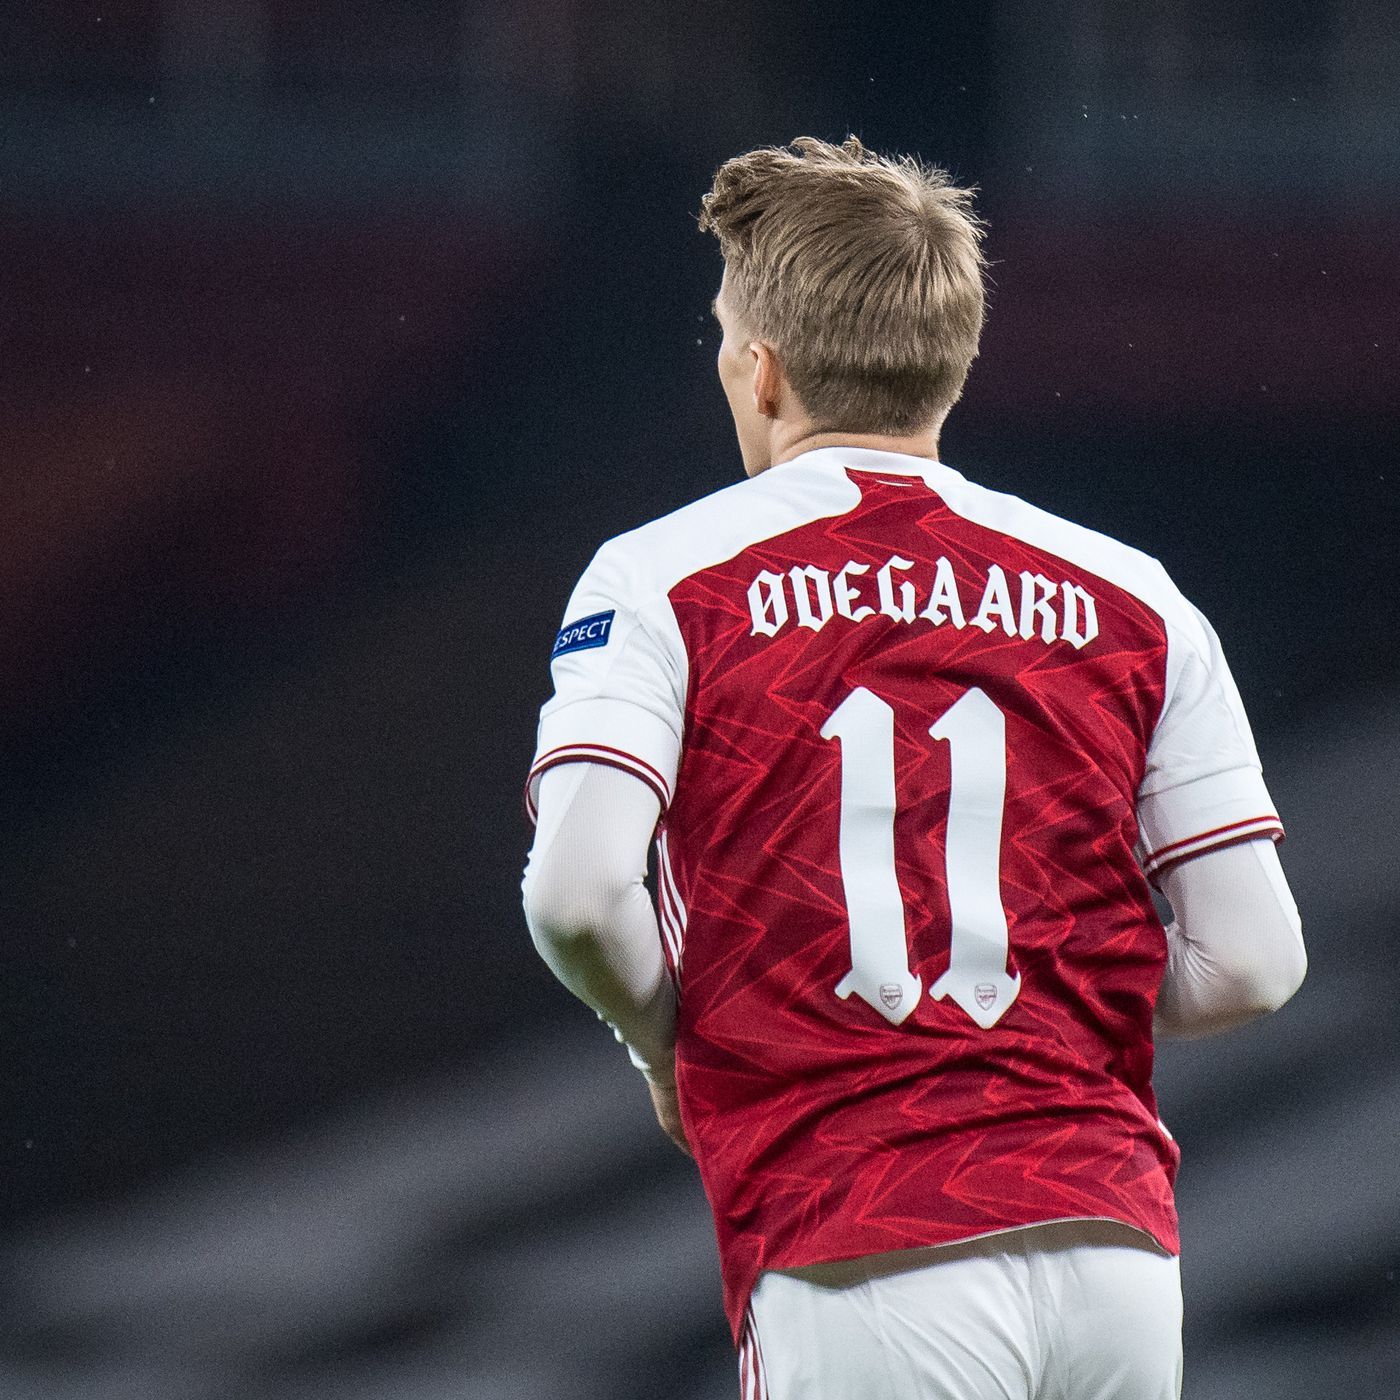 Odegaard: “My future at Arsenal? We'll see what happens next summer”